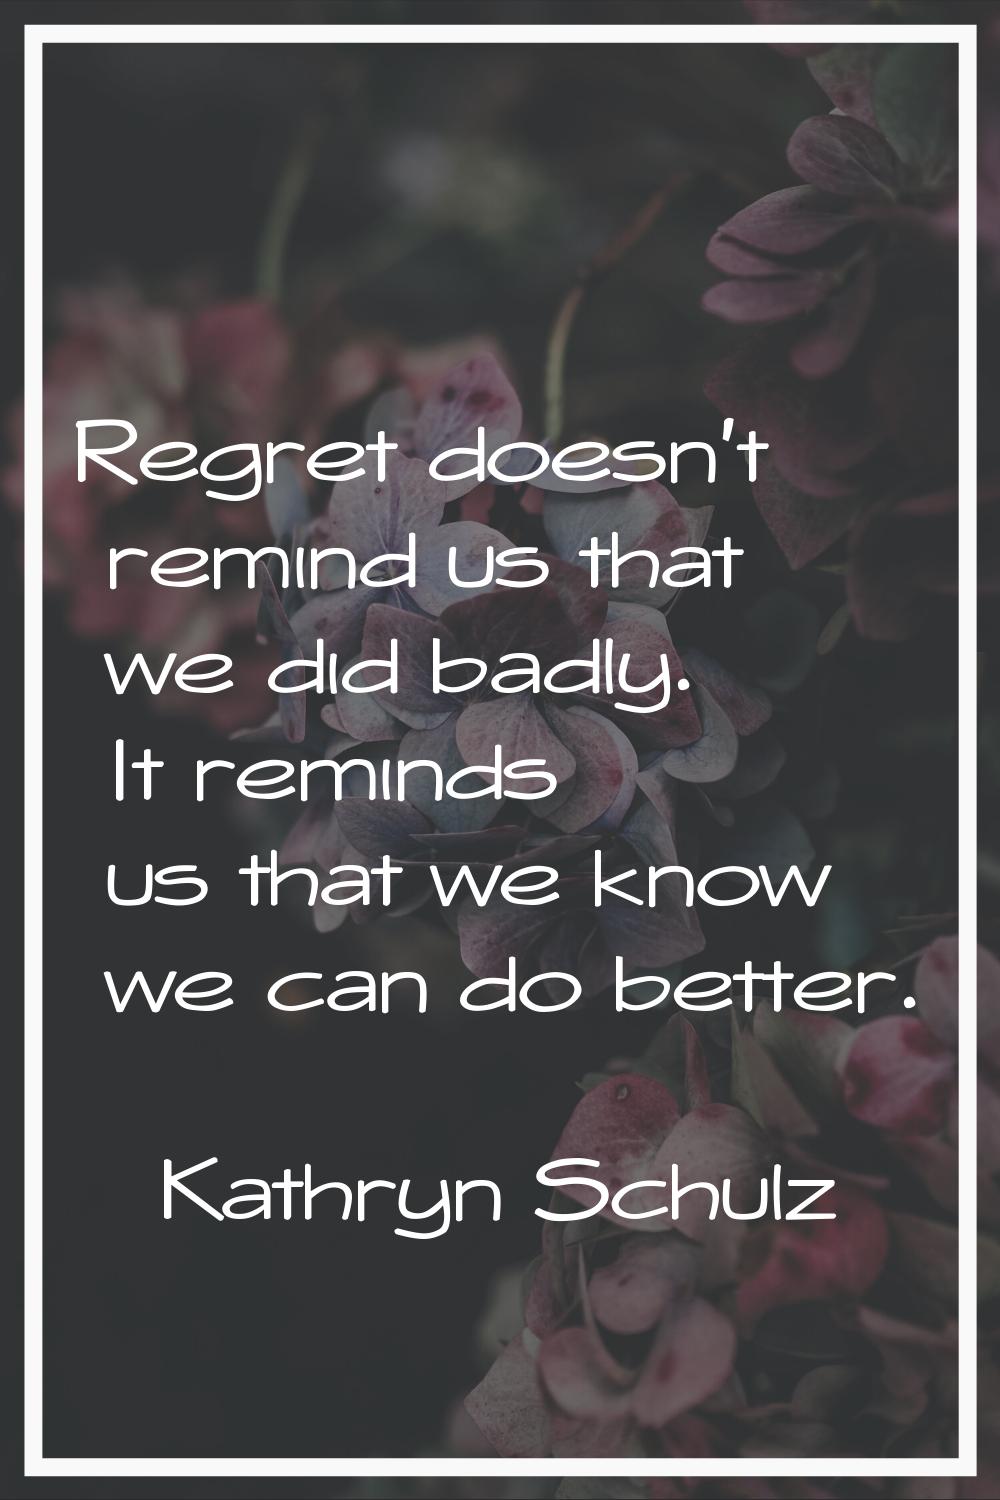 Regret doesn't remind us that we did badly. It reminds us that we know we can do better.